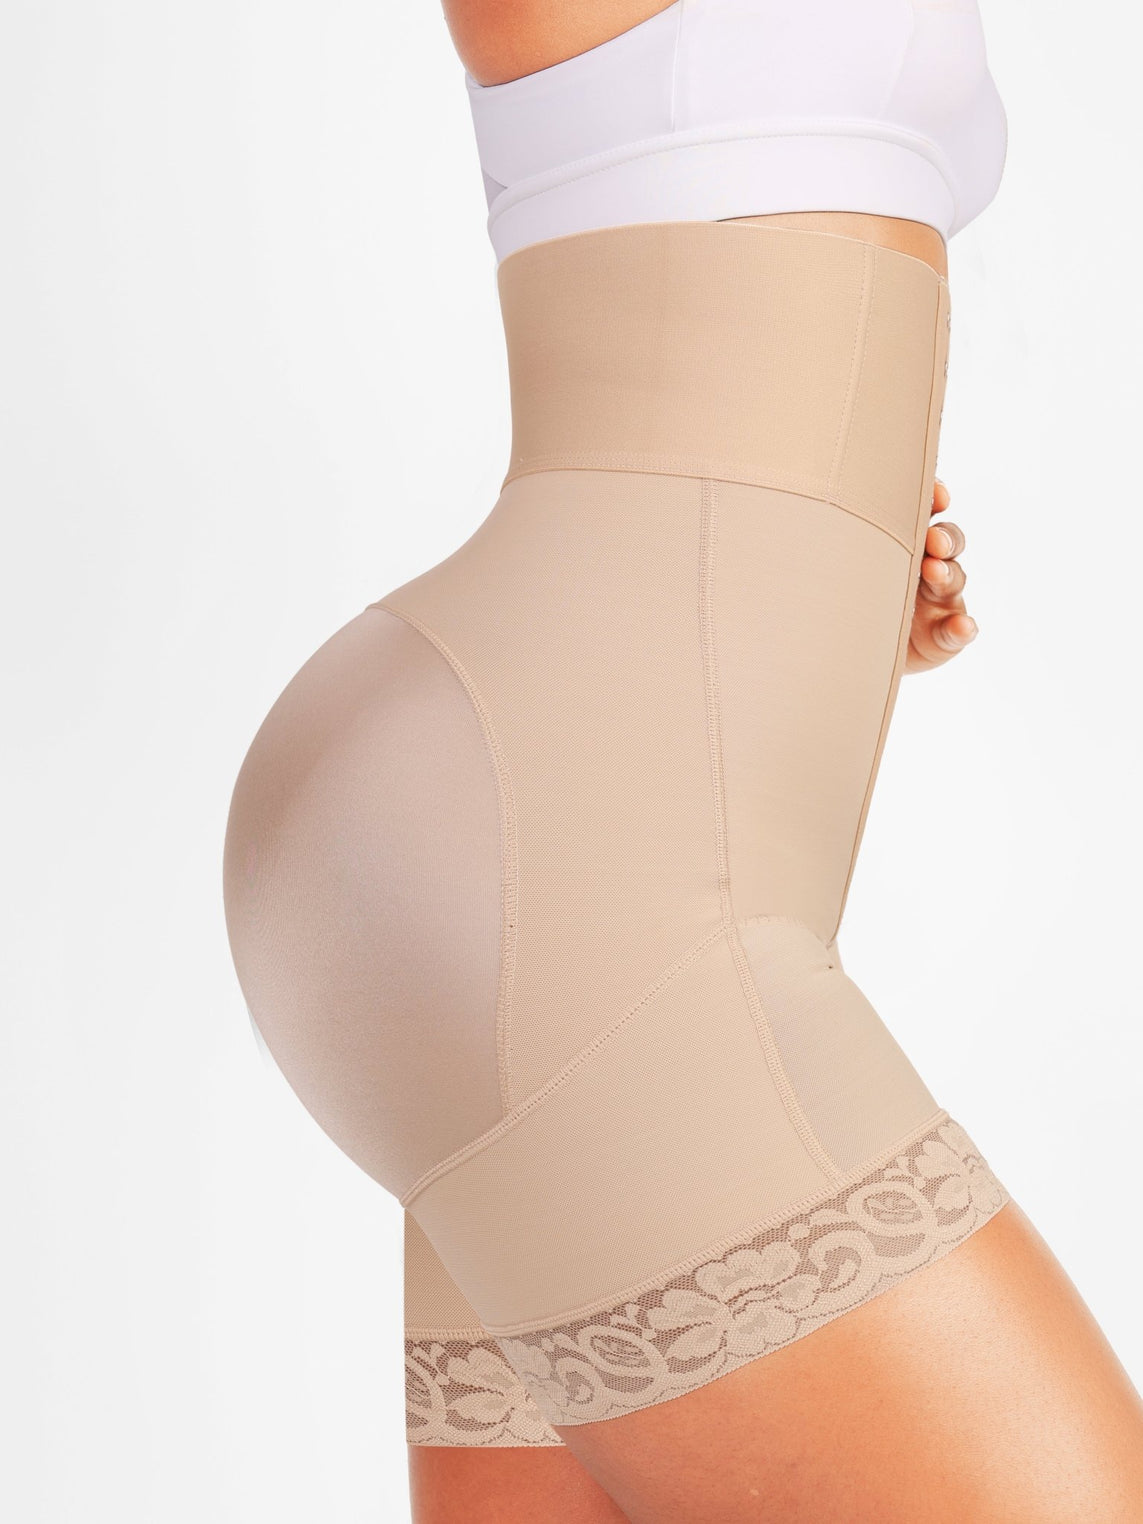 Valentina 2.0 - High Waisted Body Shaper 3 Rows of Hooks and Boning